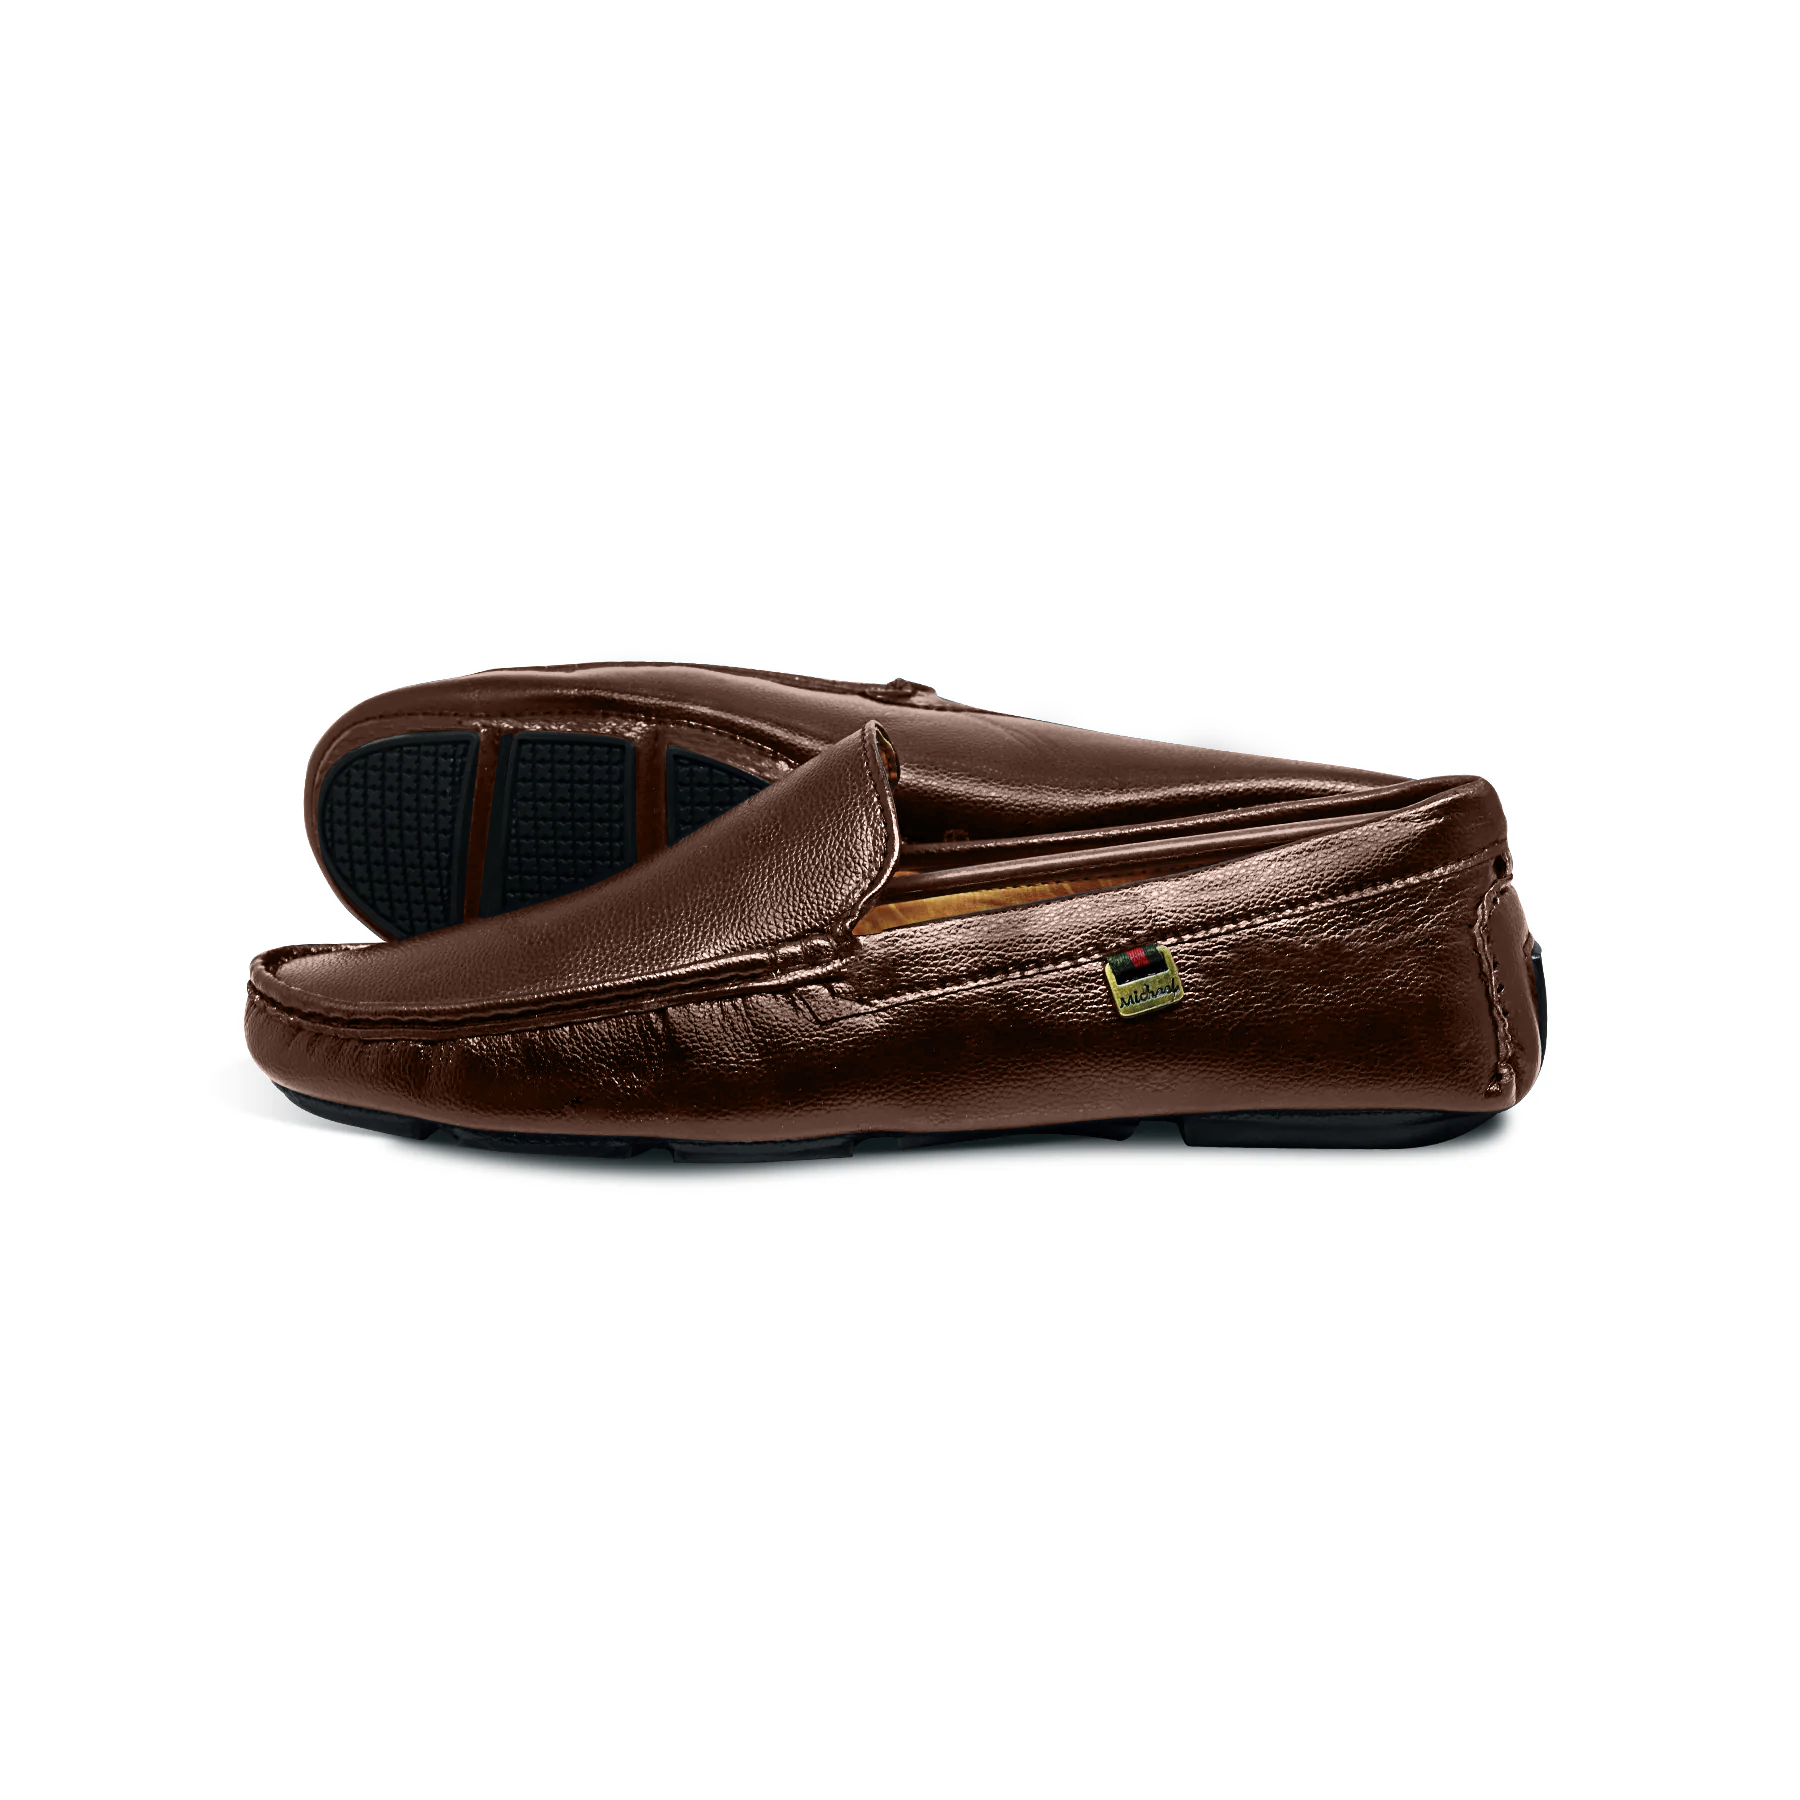 Simba Casuals Loafers